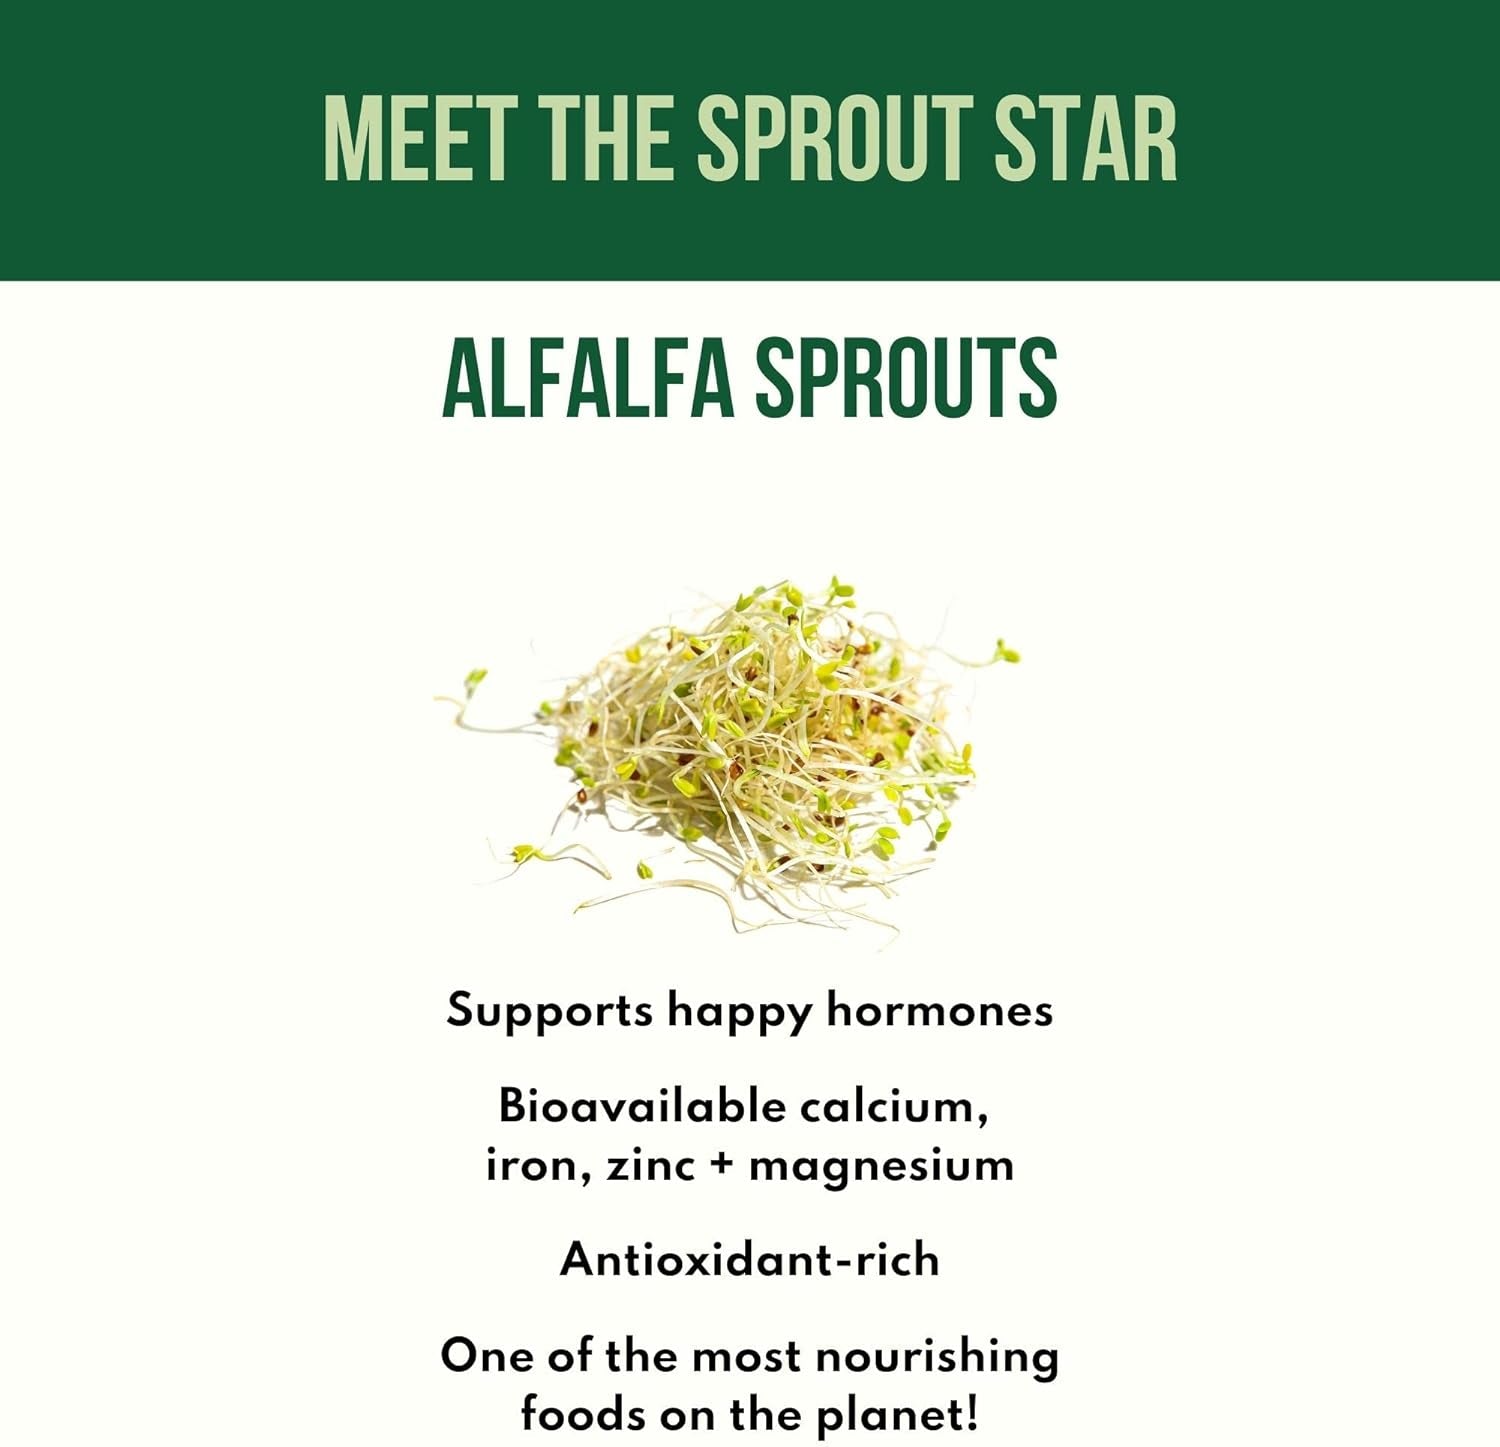 Chai Balance Sprout Powder: Golden Milk Morning Ritual with Alfalfa Sprouts, Adaptogens and Warming Spices - Organic Caffeine-Free Chai with Turmeric, Rhodiola, Cordyceps, and Ginger